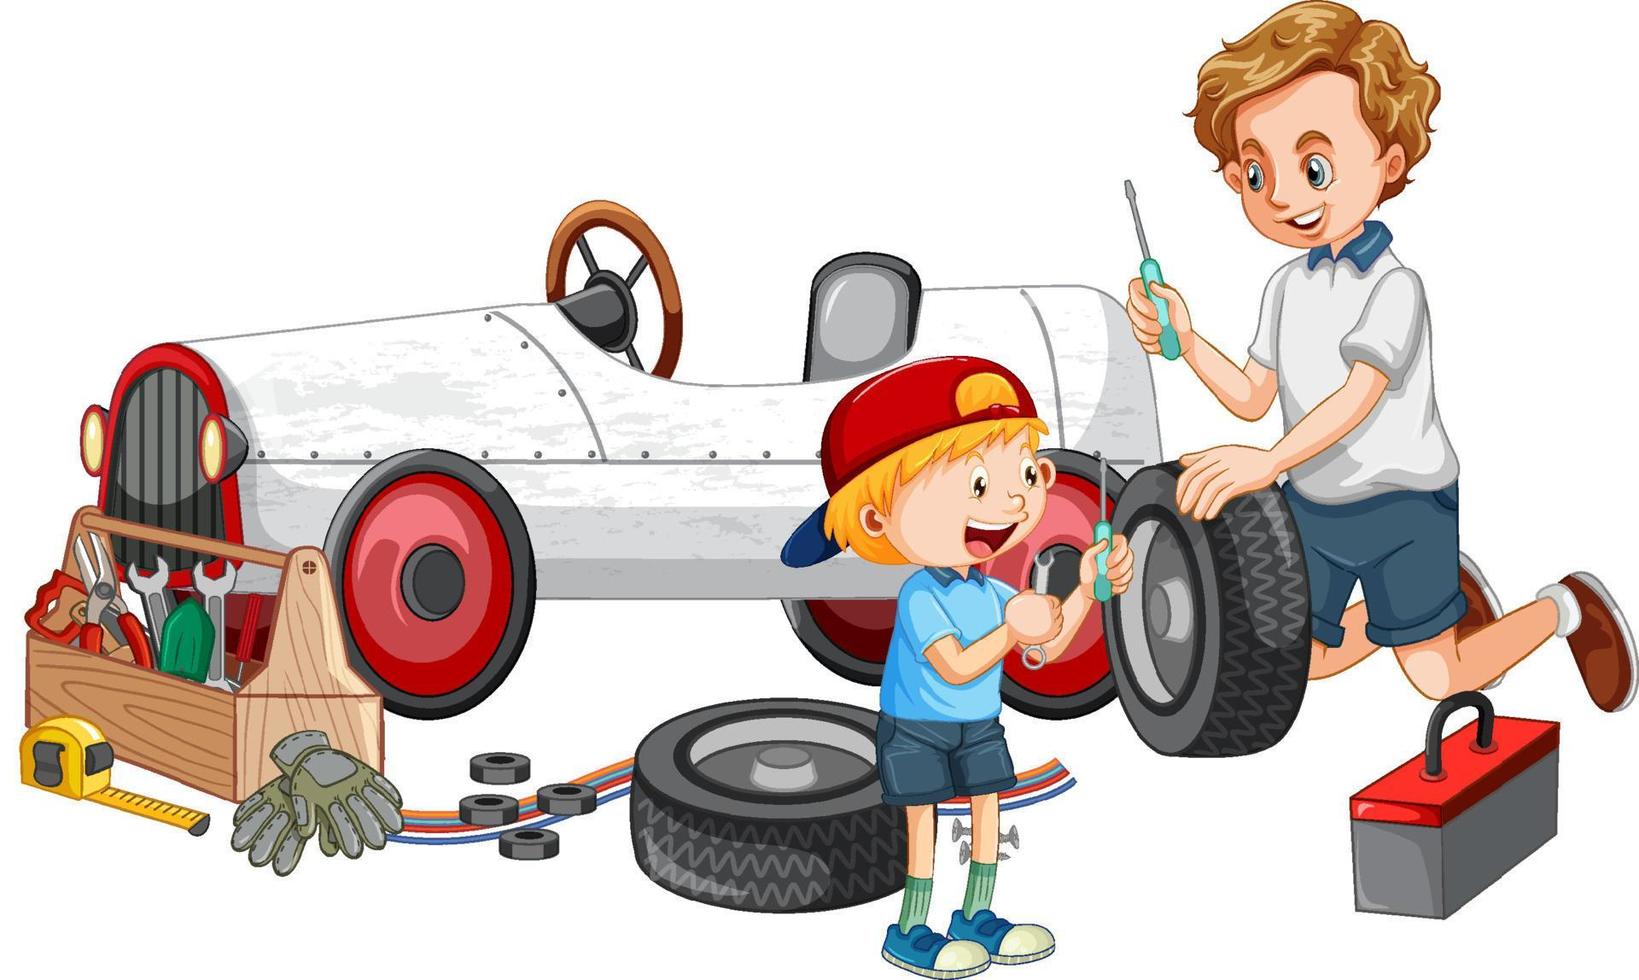 Dad and son repairing a car together vector